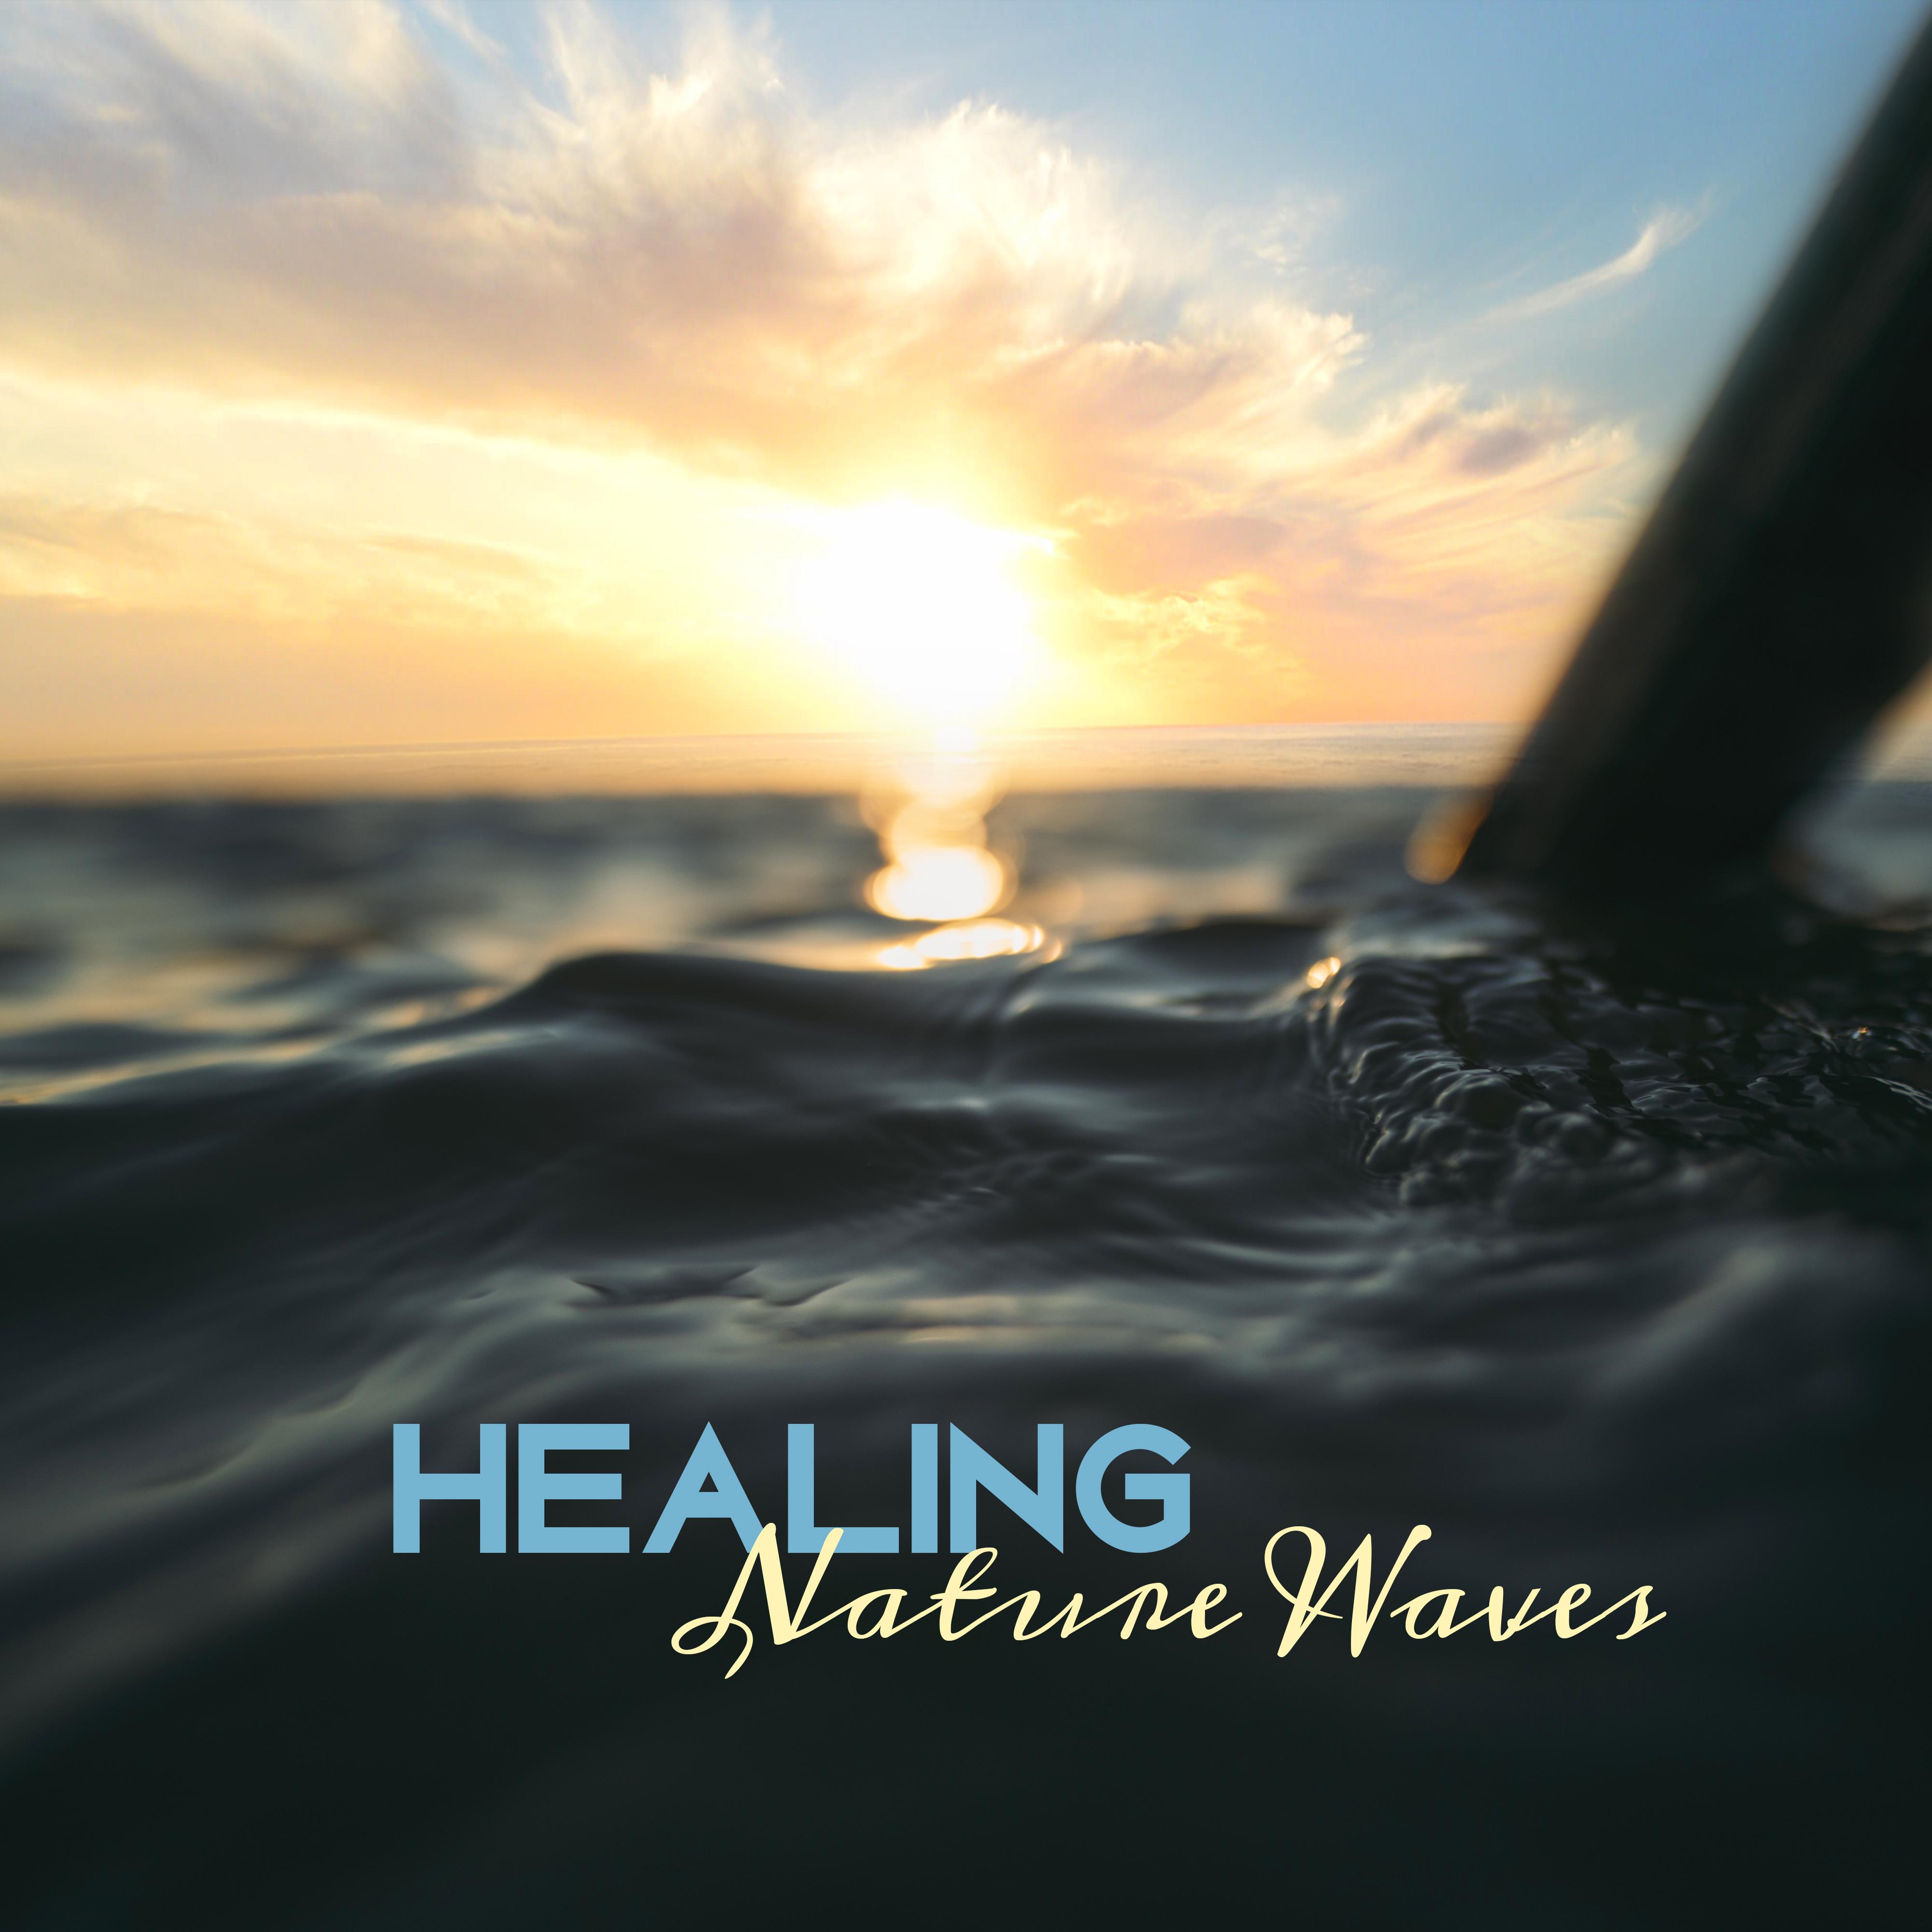 Healing Nature Waves – Soothing Nature Waves, Stress Relief, Music to Calm Down, Mind Relaxation